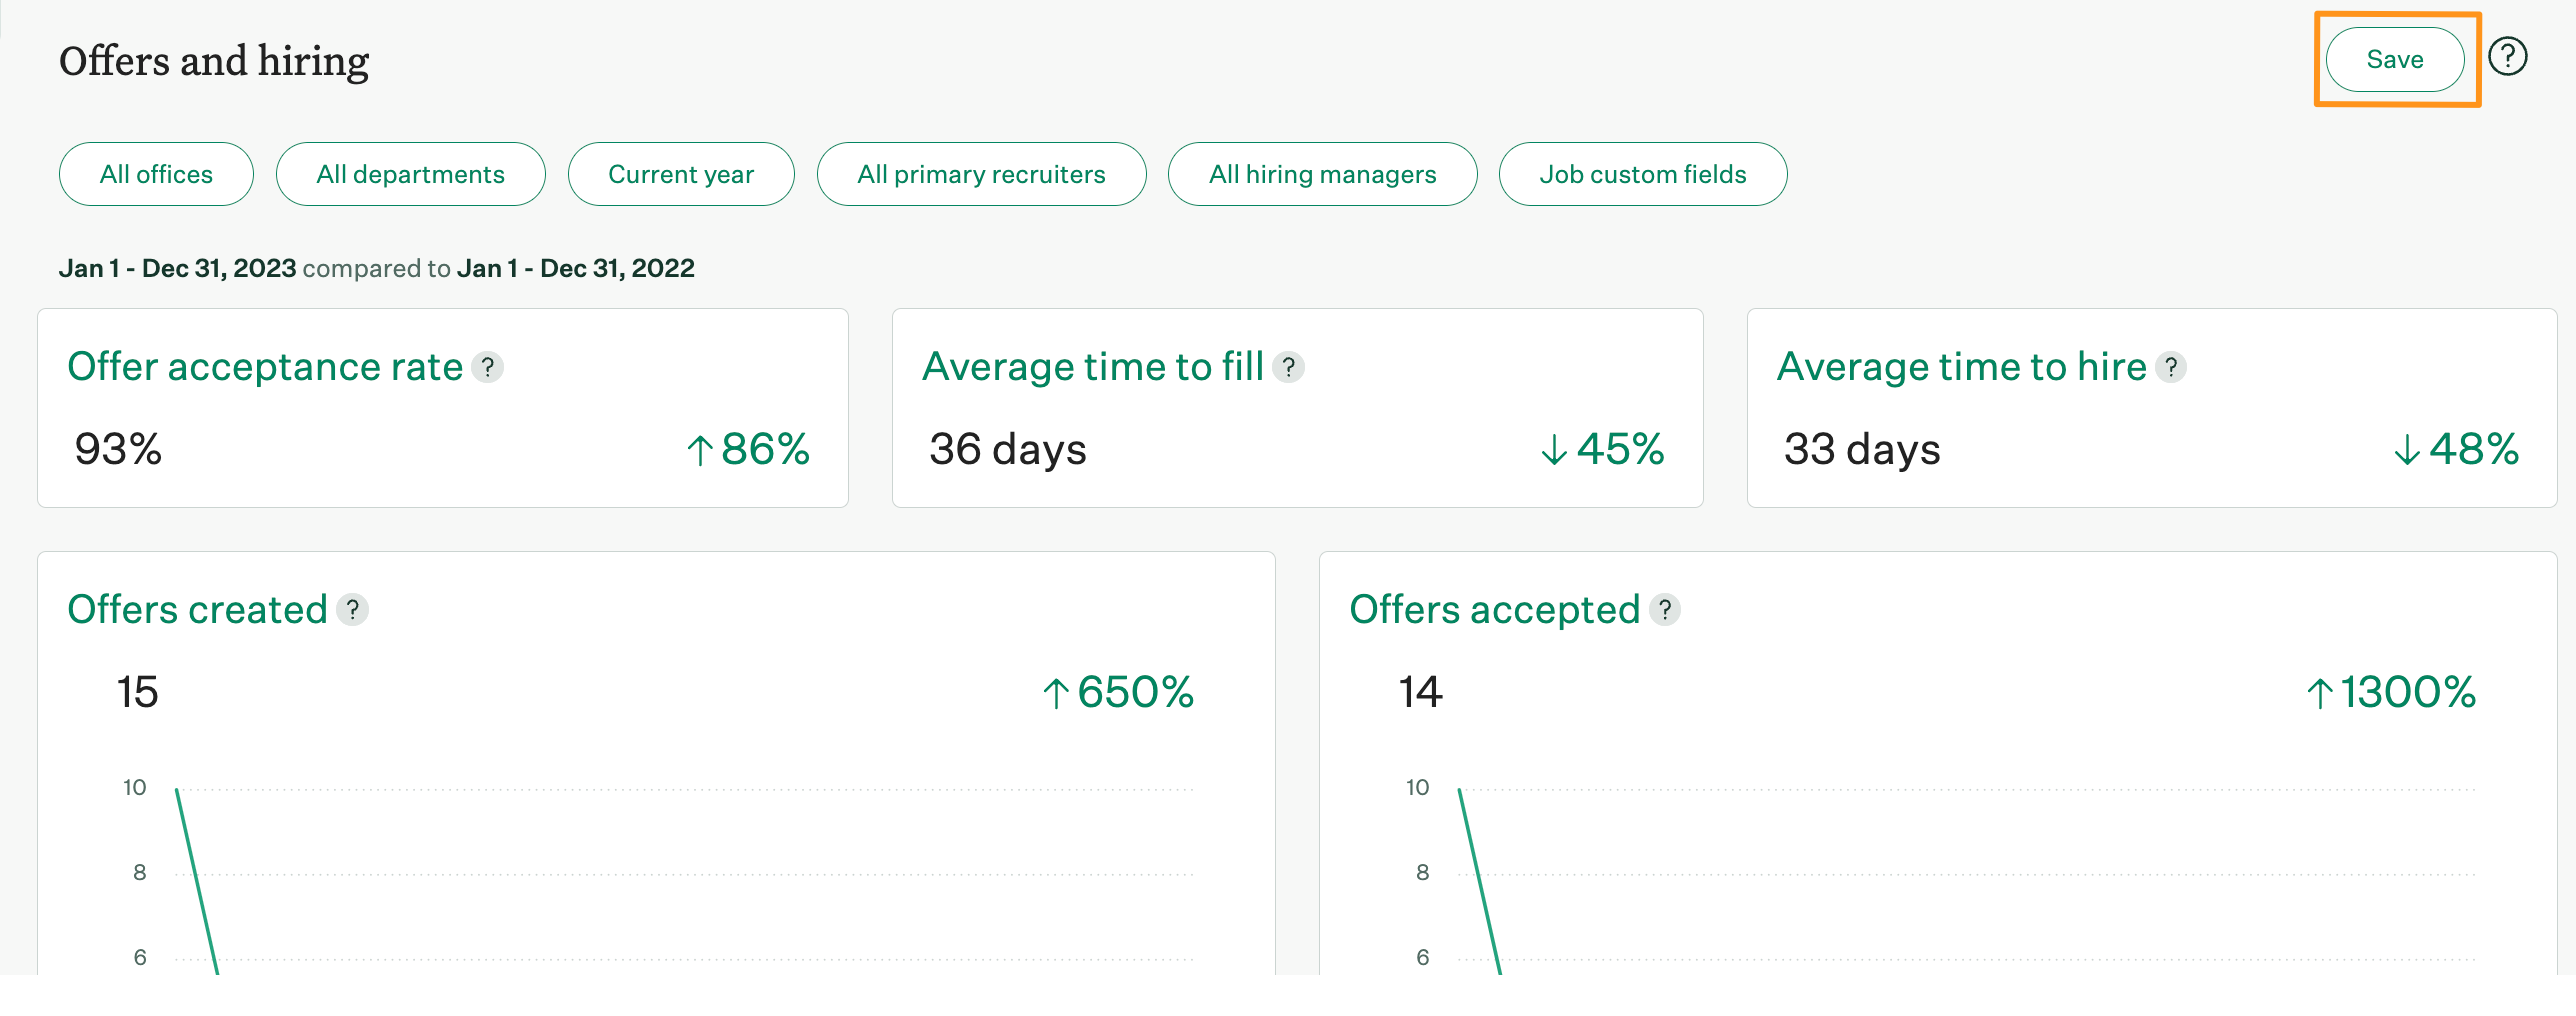 Save button on offers_and_hiring_report_dashboards.png